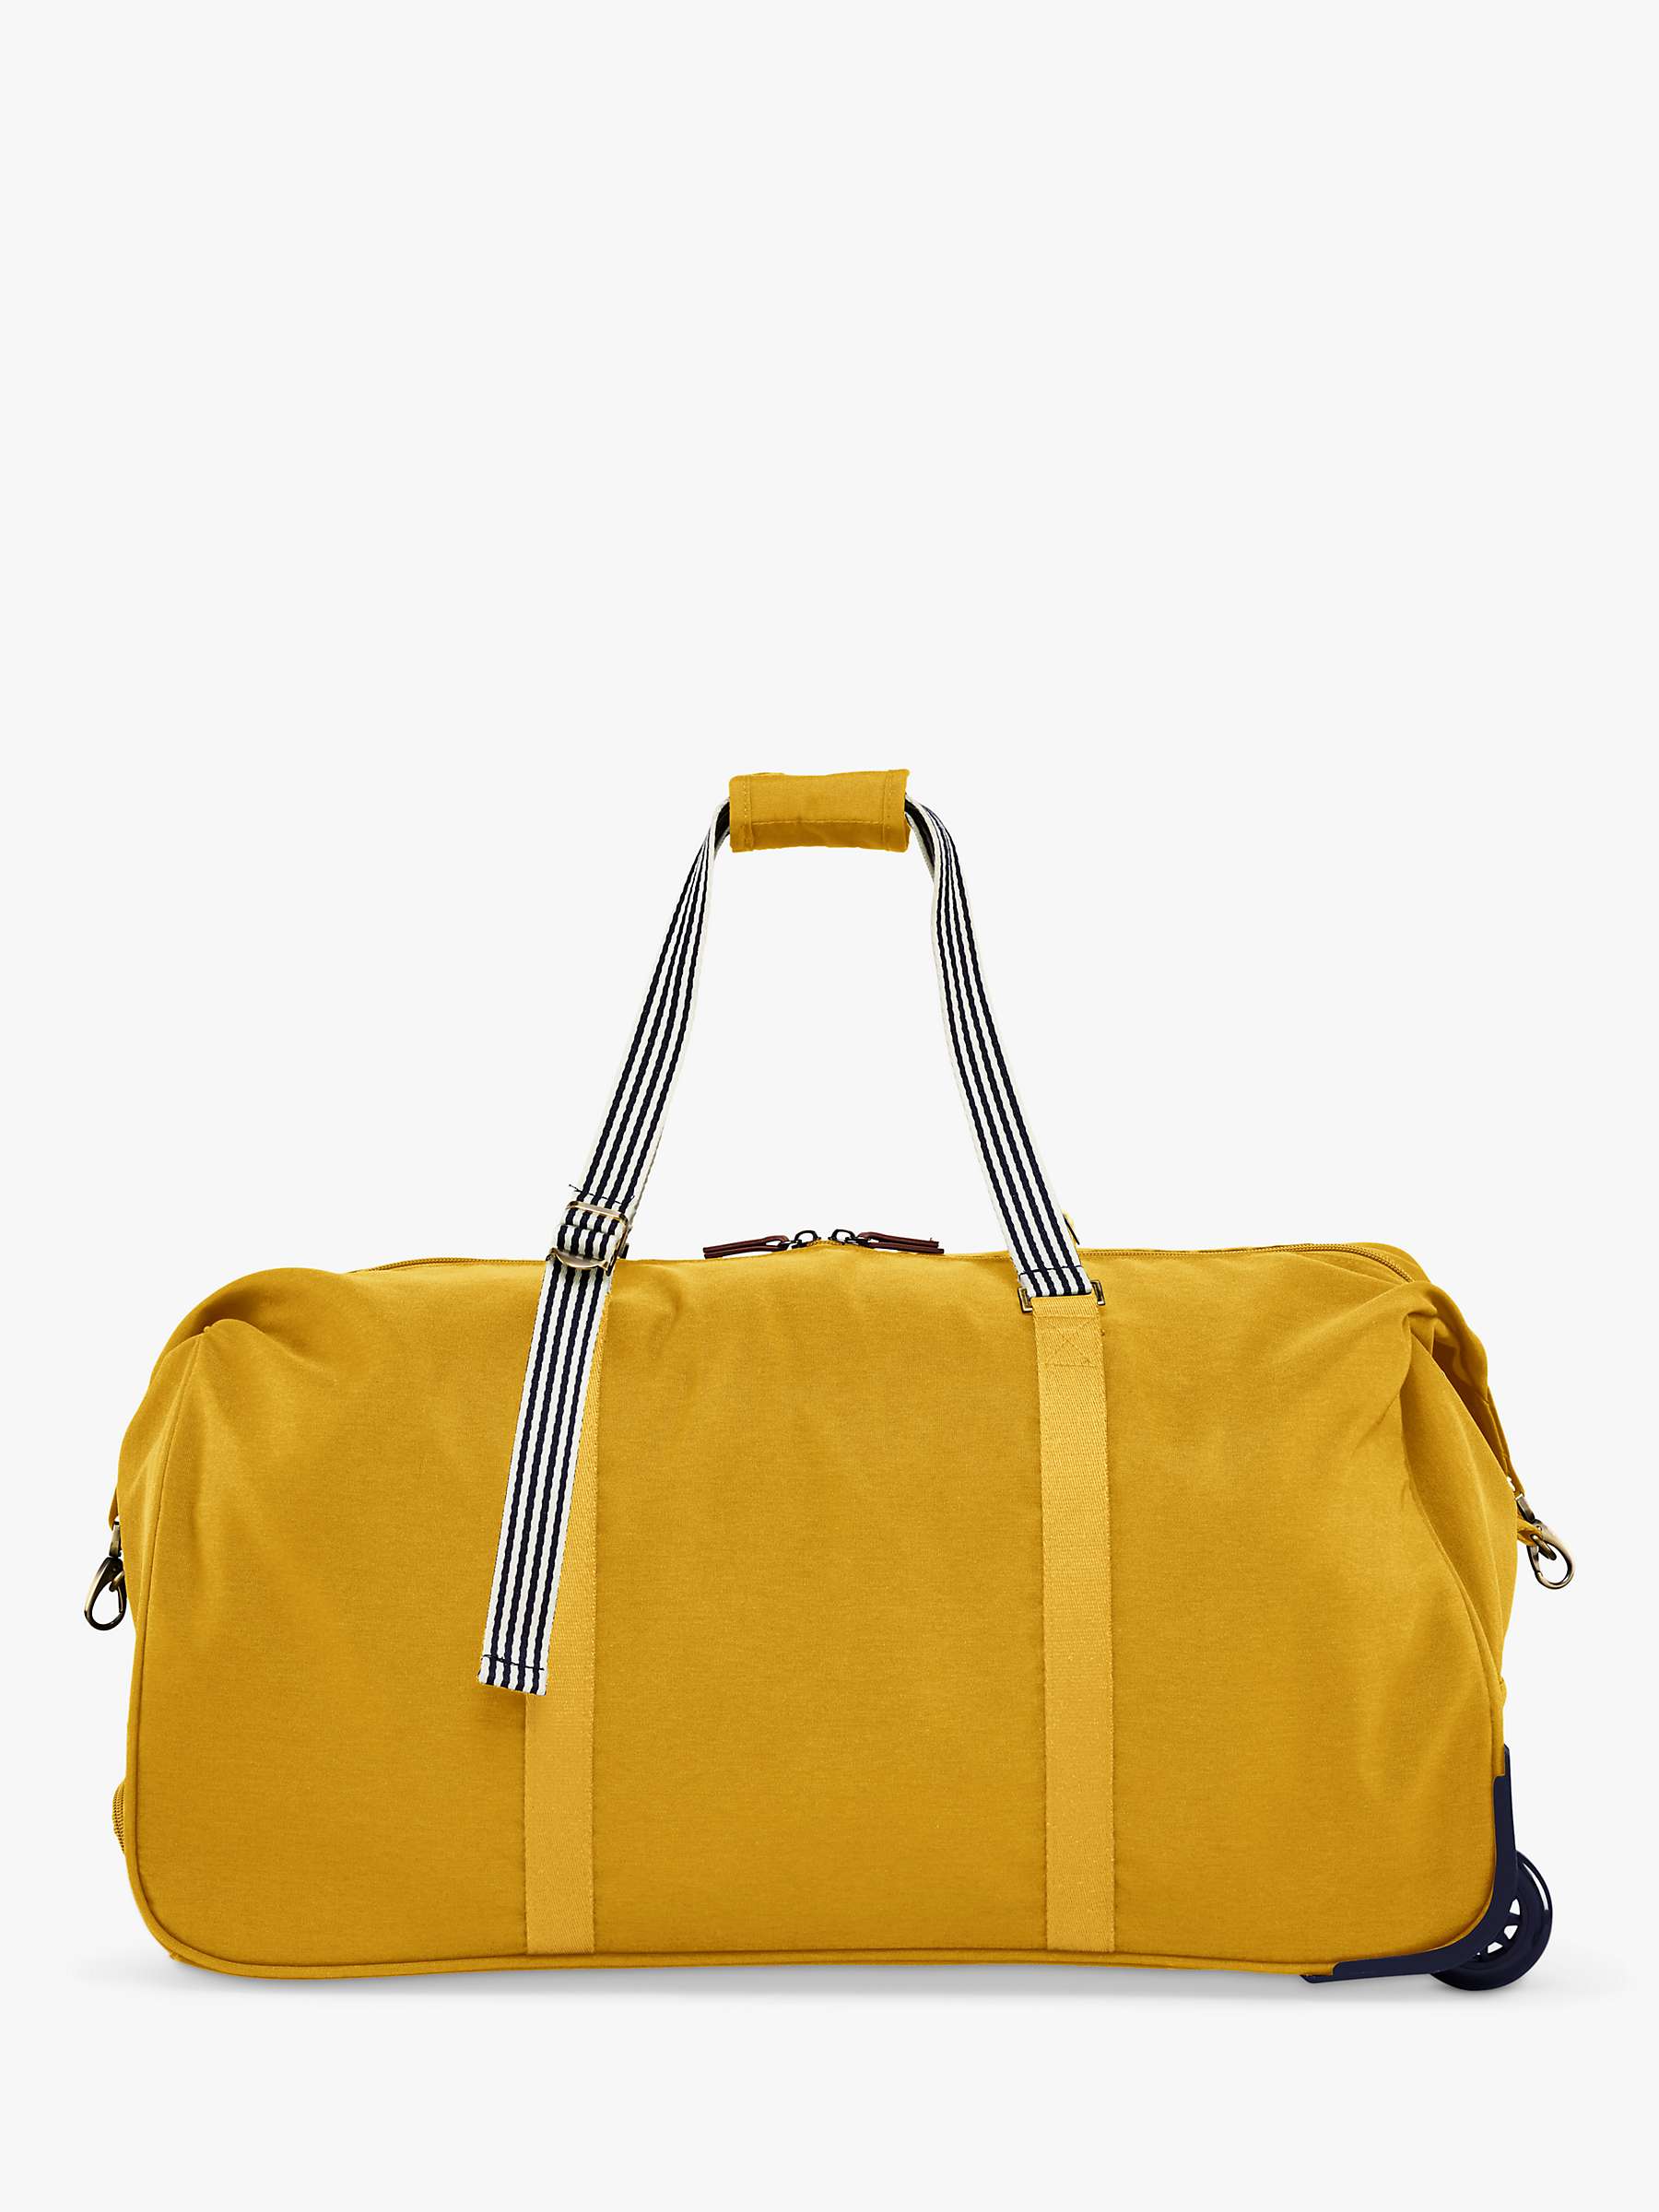 Buy Joules Coast Collection 2-Wheel Duffle Bag Online at johnlewis.com